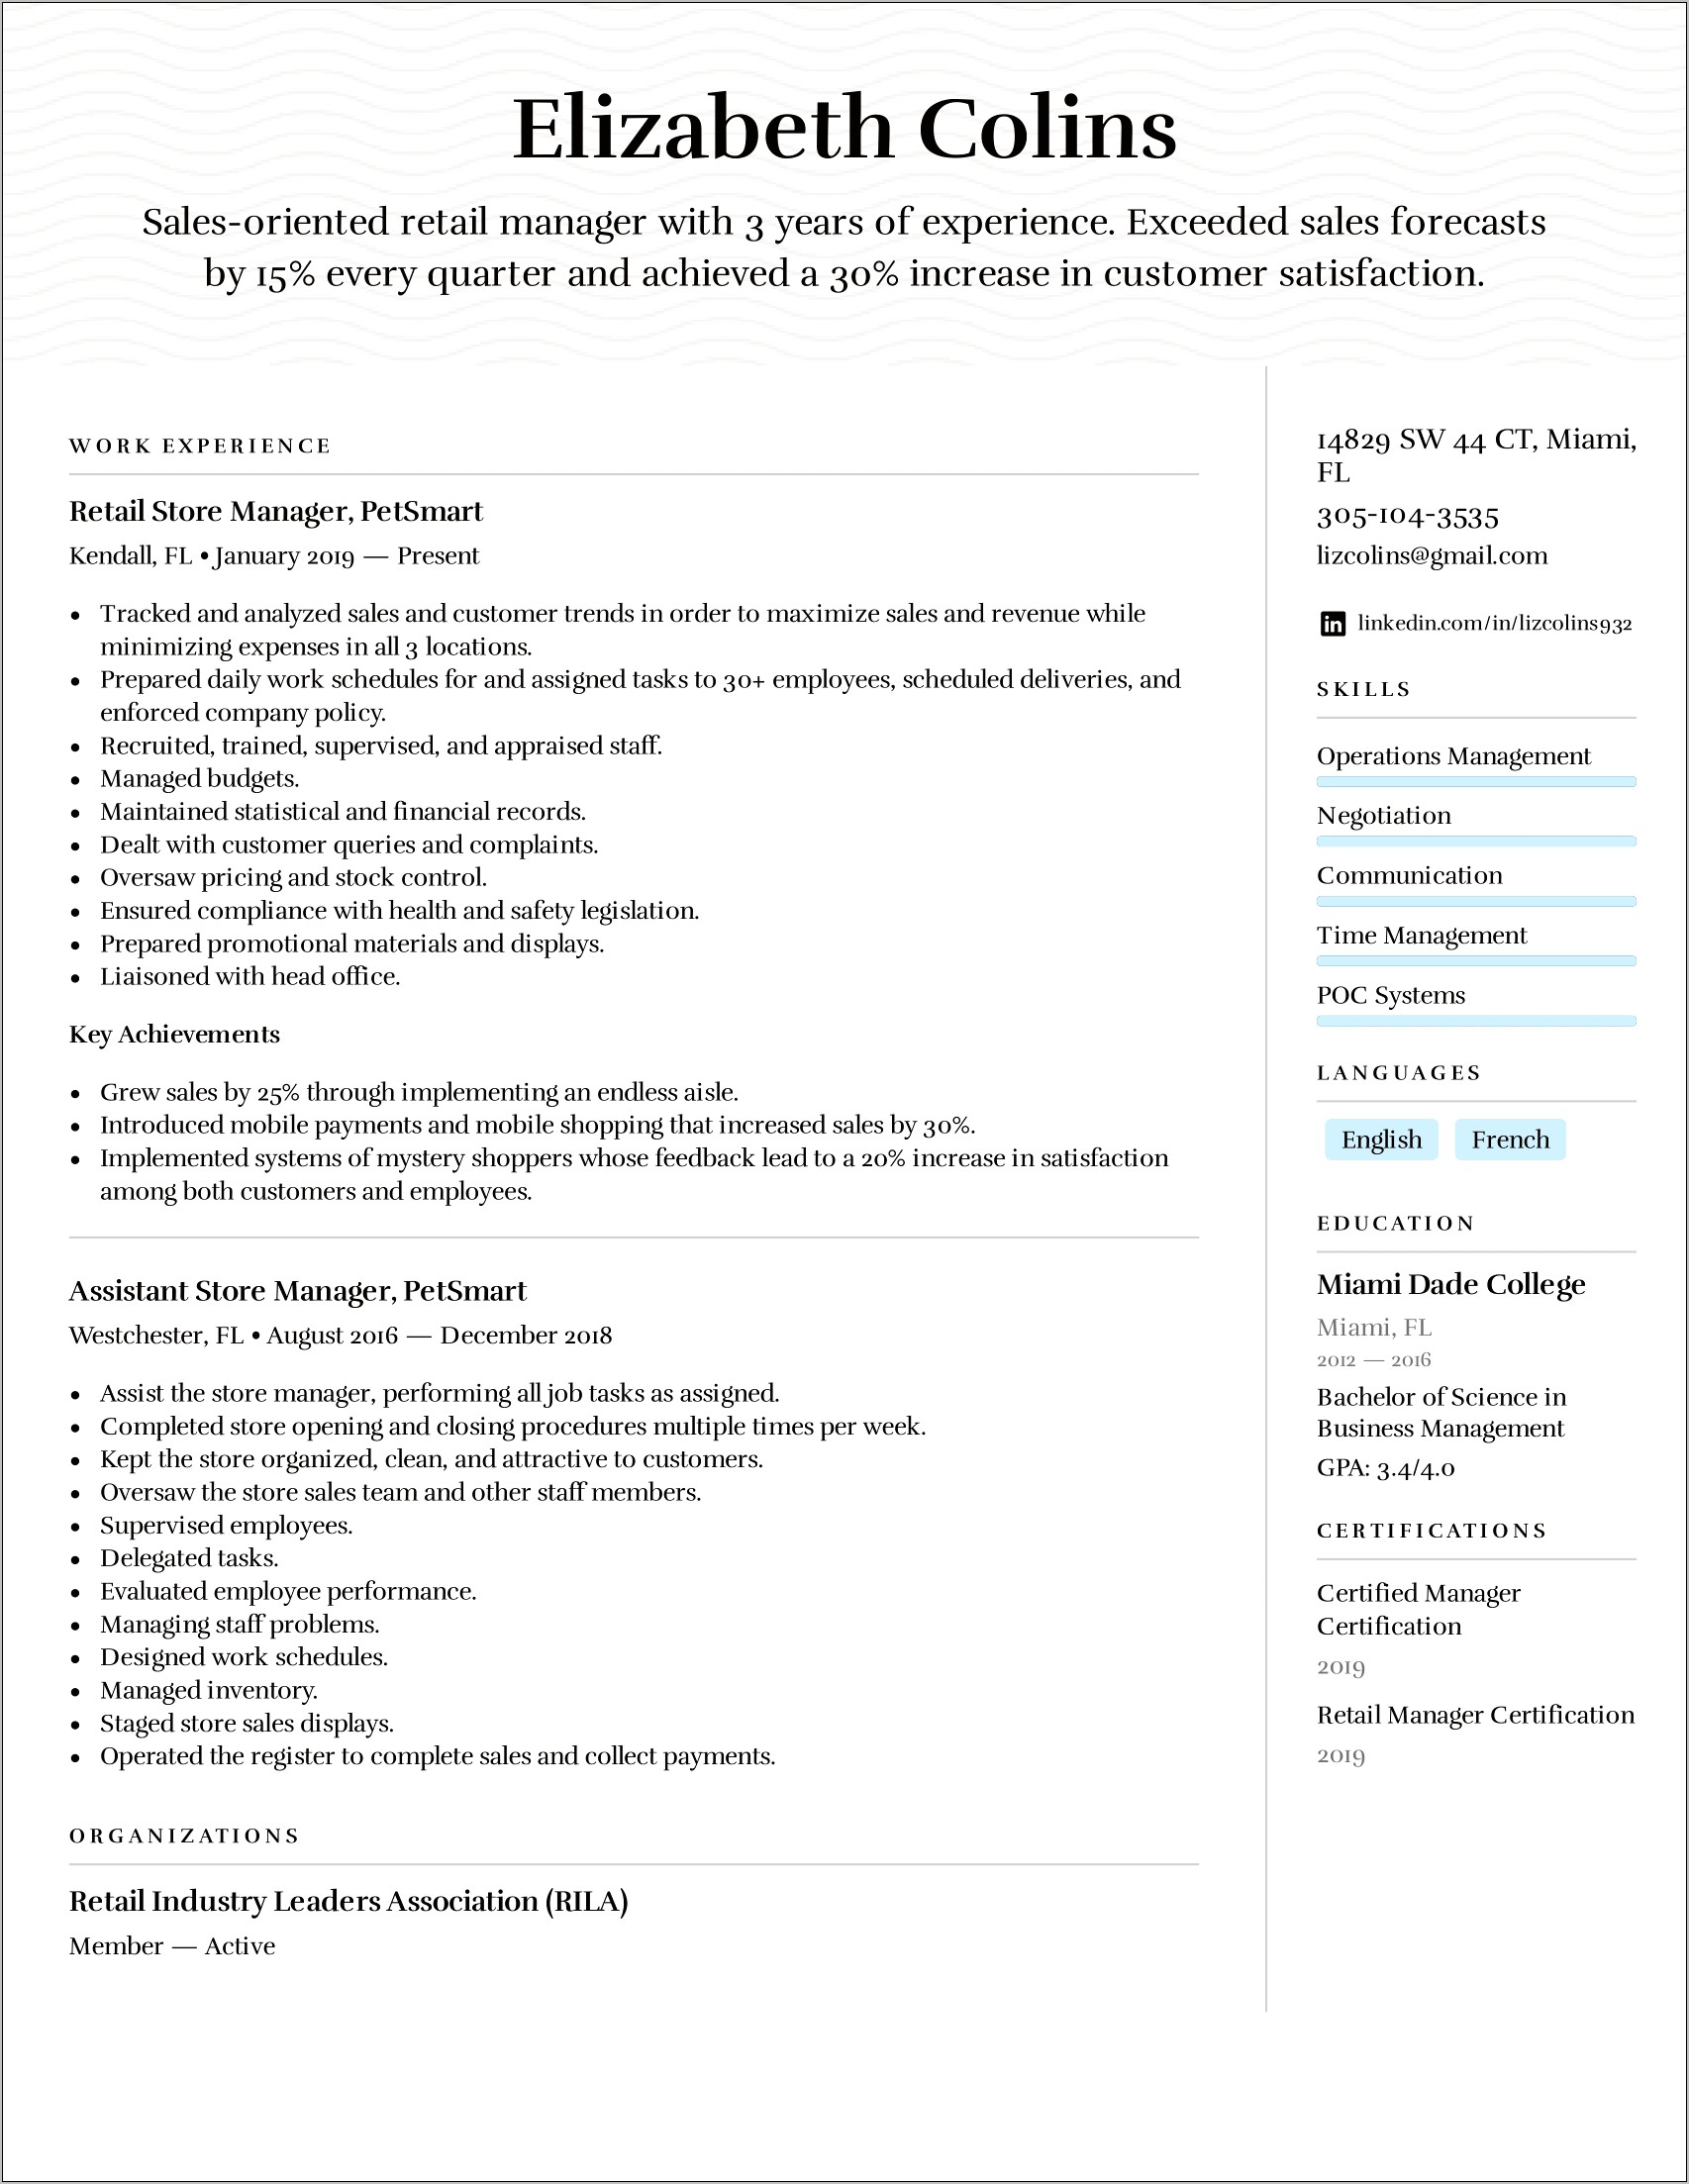 Healthcare Compliance Officer Resume Example